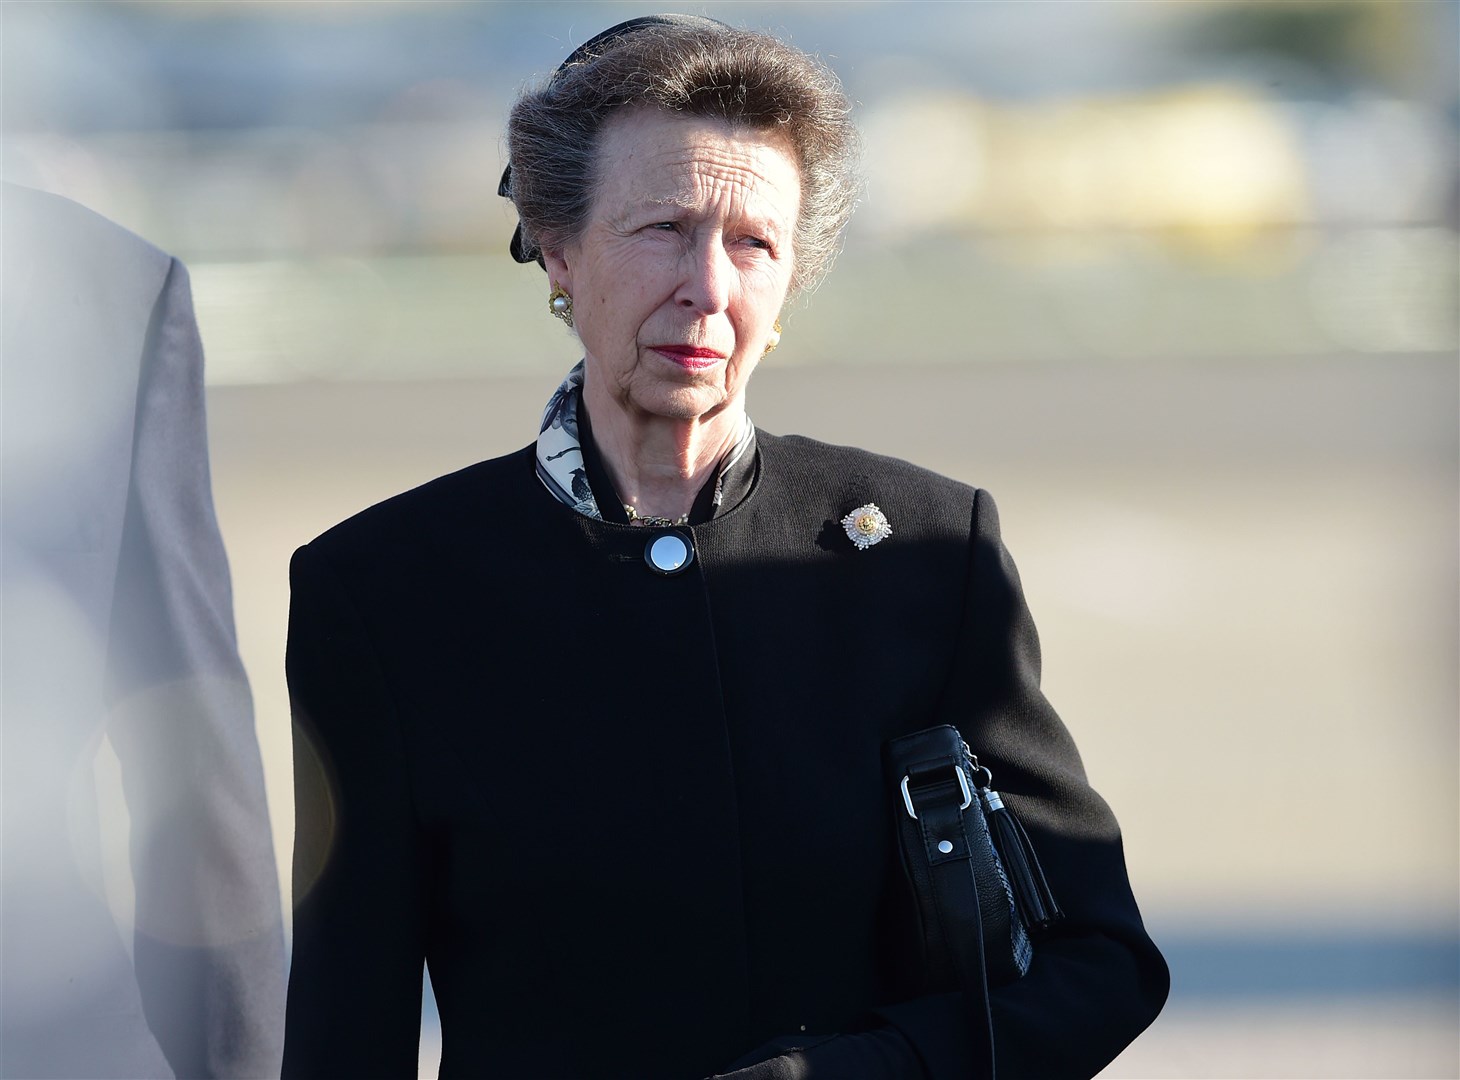 The Princess Royal as the Queen’s coffin is met at Edinburgh Airport (Victoria Stewart/Daily Record/PA)